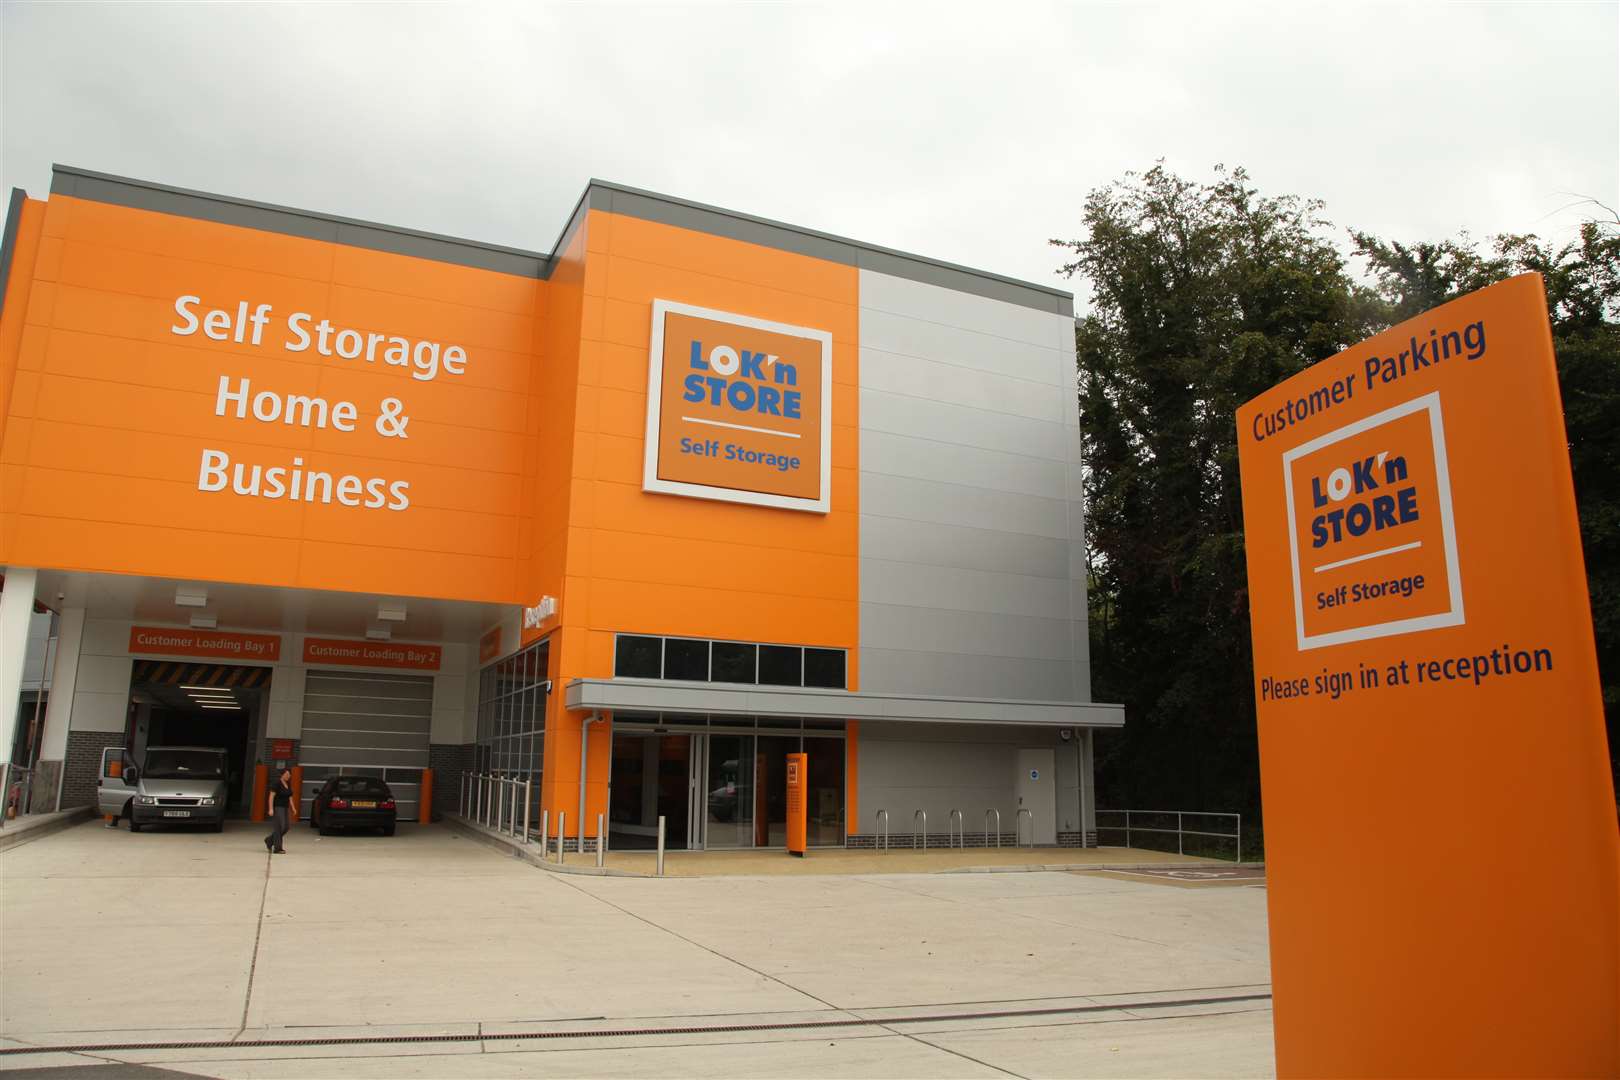 Lok'nStore will open a new site in Gillingham